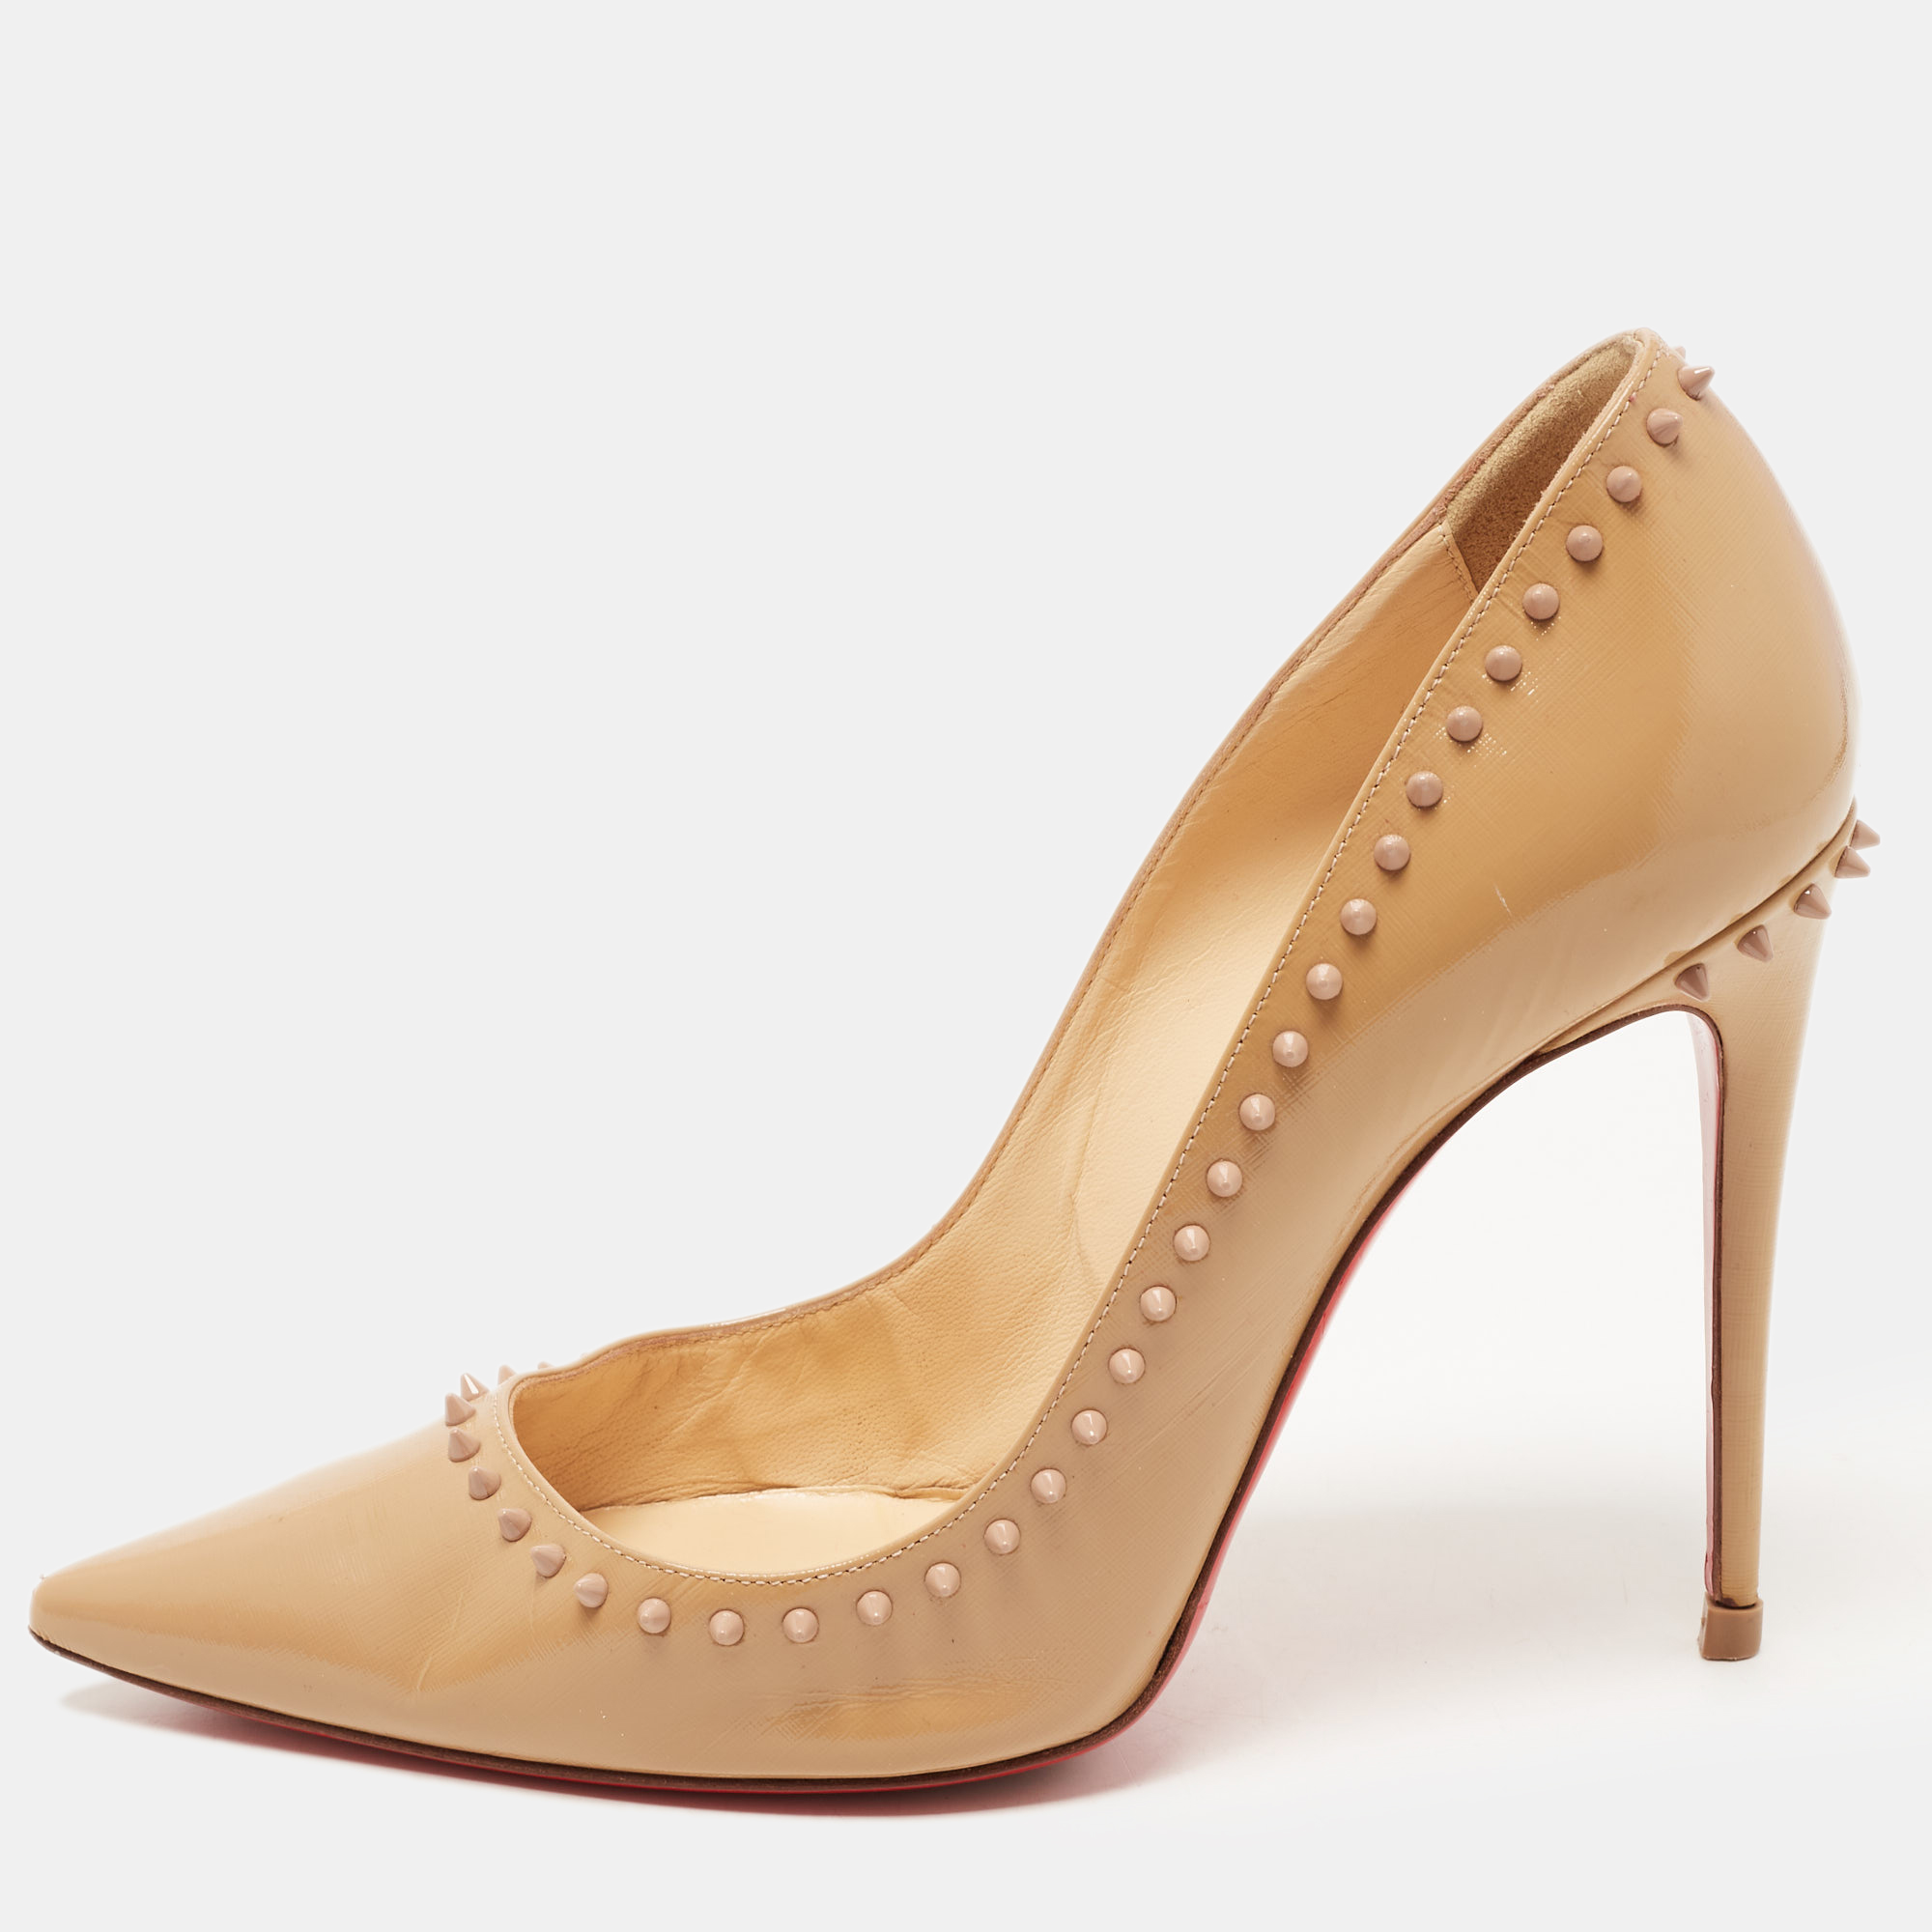 Pre-owned Christian Louboutin Beige Patent Leather Anjalina Spike Pointed Toe Pumps Size 38.5